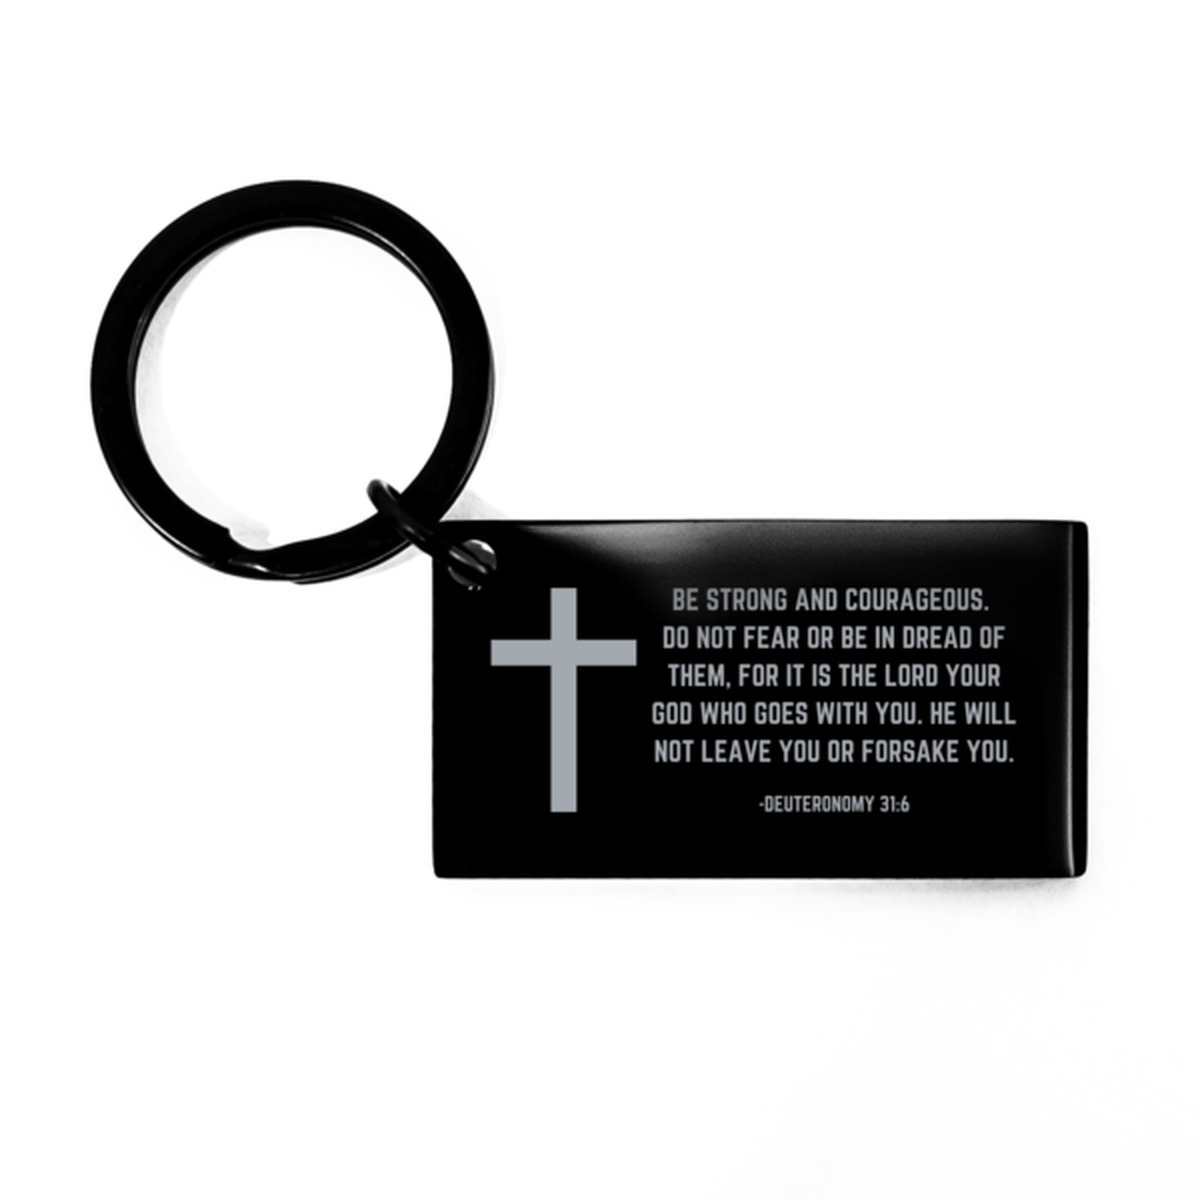 Baptism Gifts For Teenage Boys Girls, Christian Bible Verse Black Keychain, Be strong and courageous, Confirmation Gifts, Bible Verse Keyring for Son, Godson, Grandson, Nephew